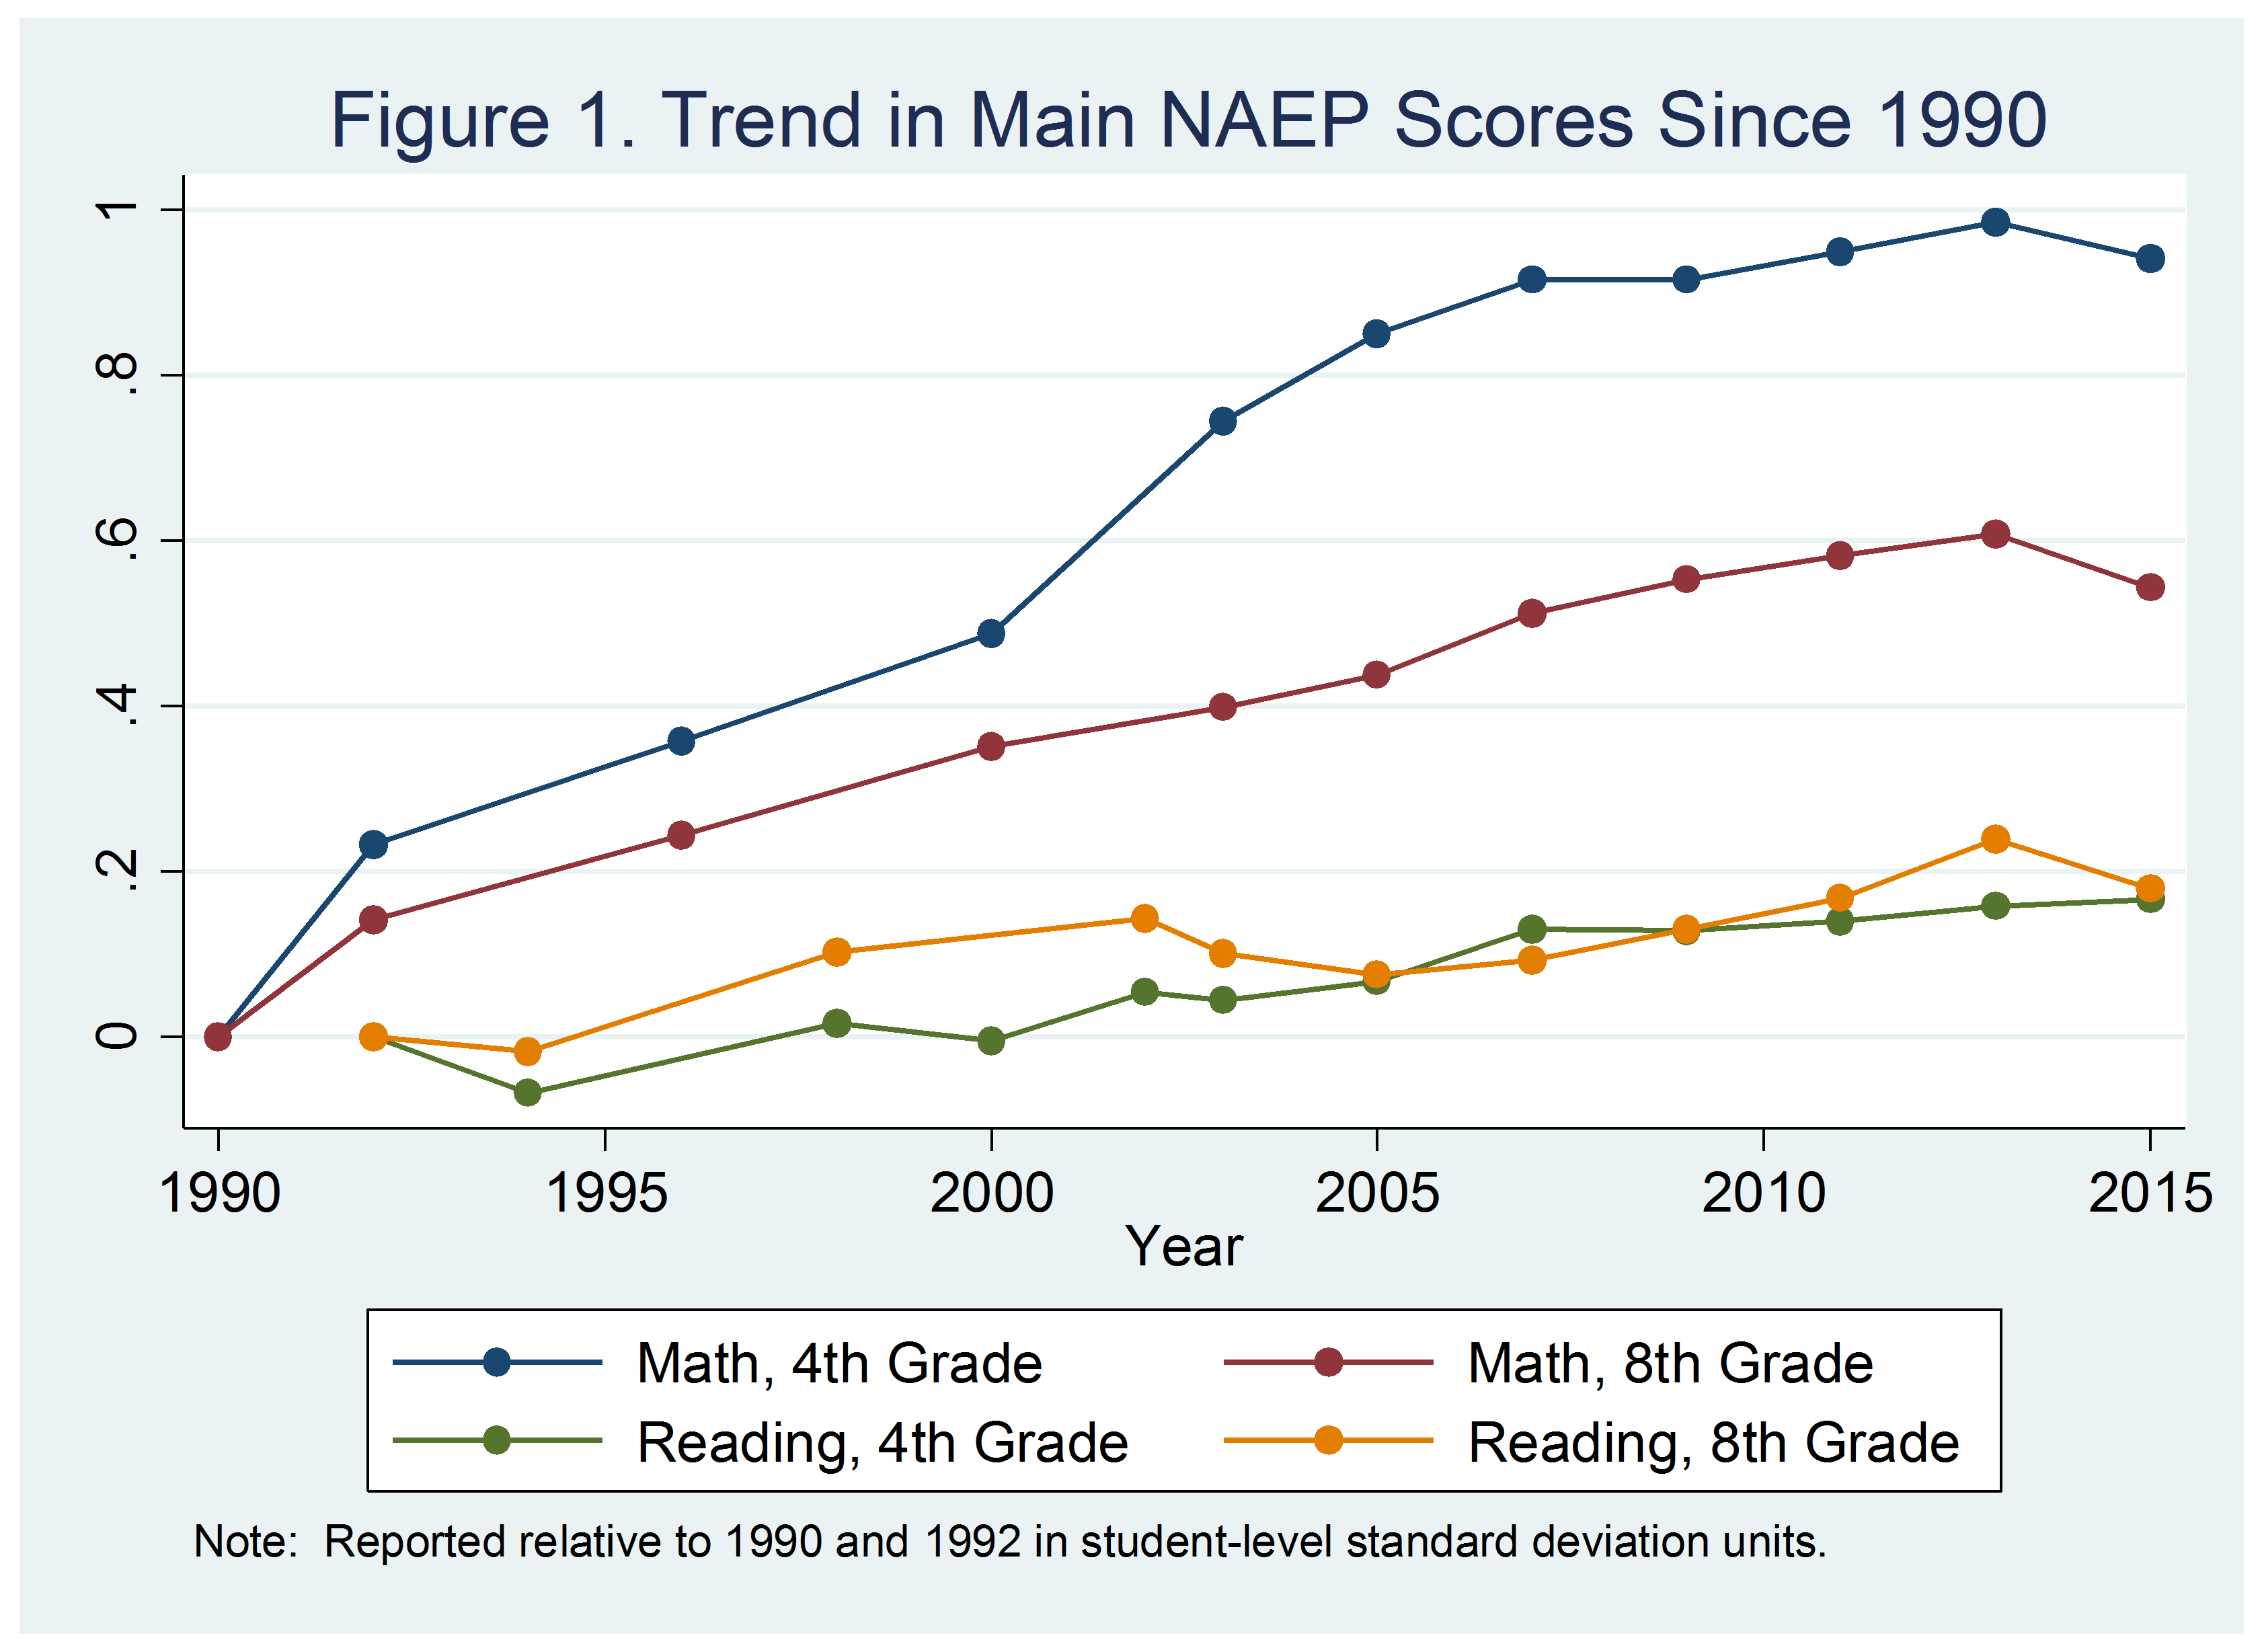 Did the Common Core assessments cause the decline in NAEP scores